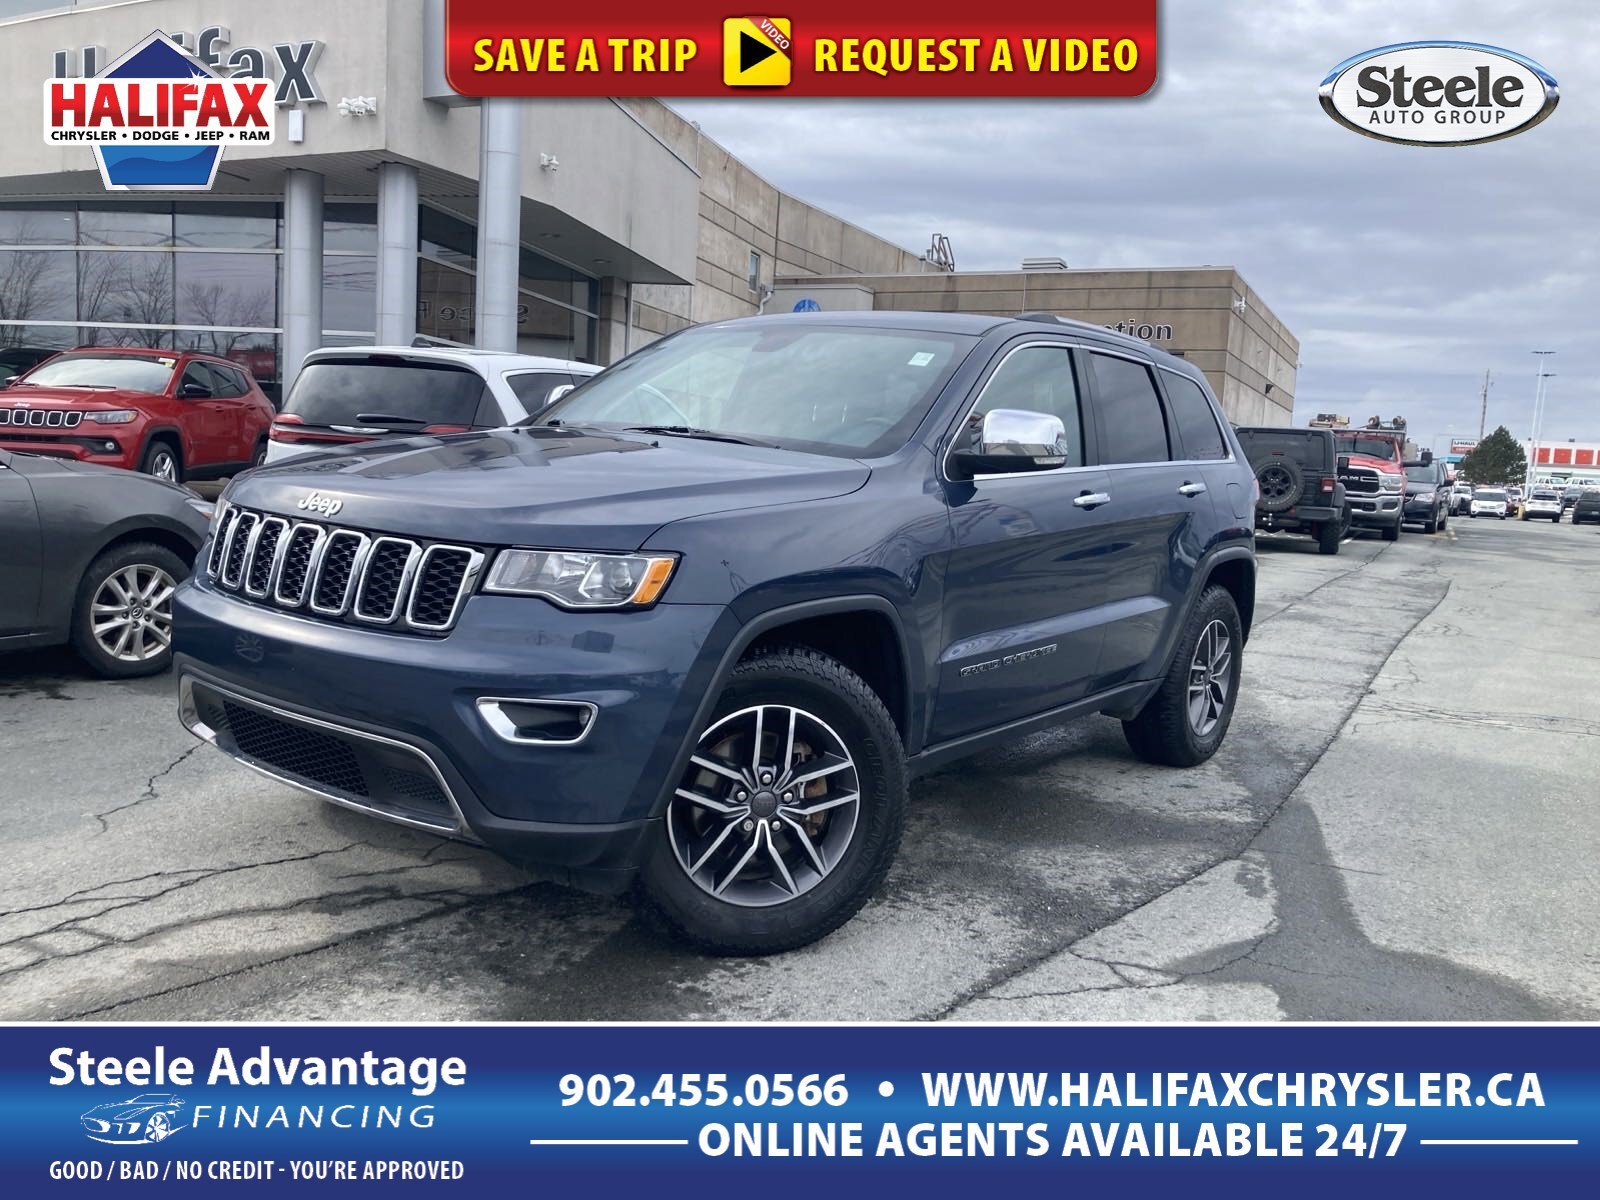 2019 Jeep Grand Cherokee Limited - HTD MEMORY LEATHER SEATS AND WHEEL, SAFE